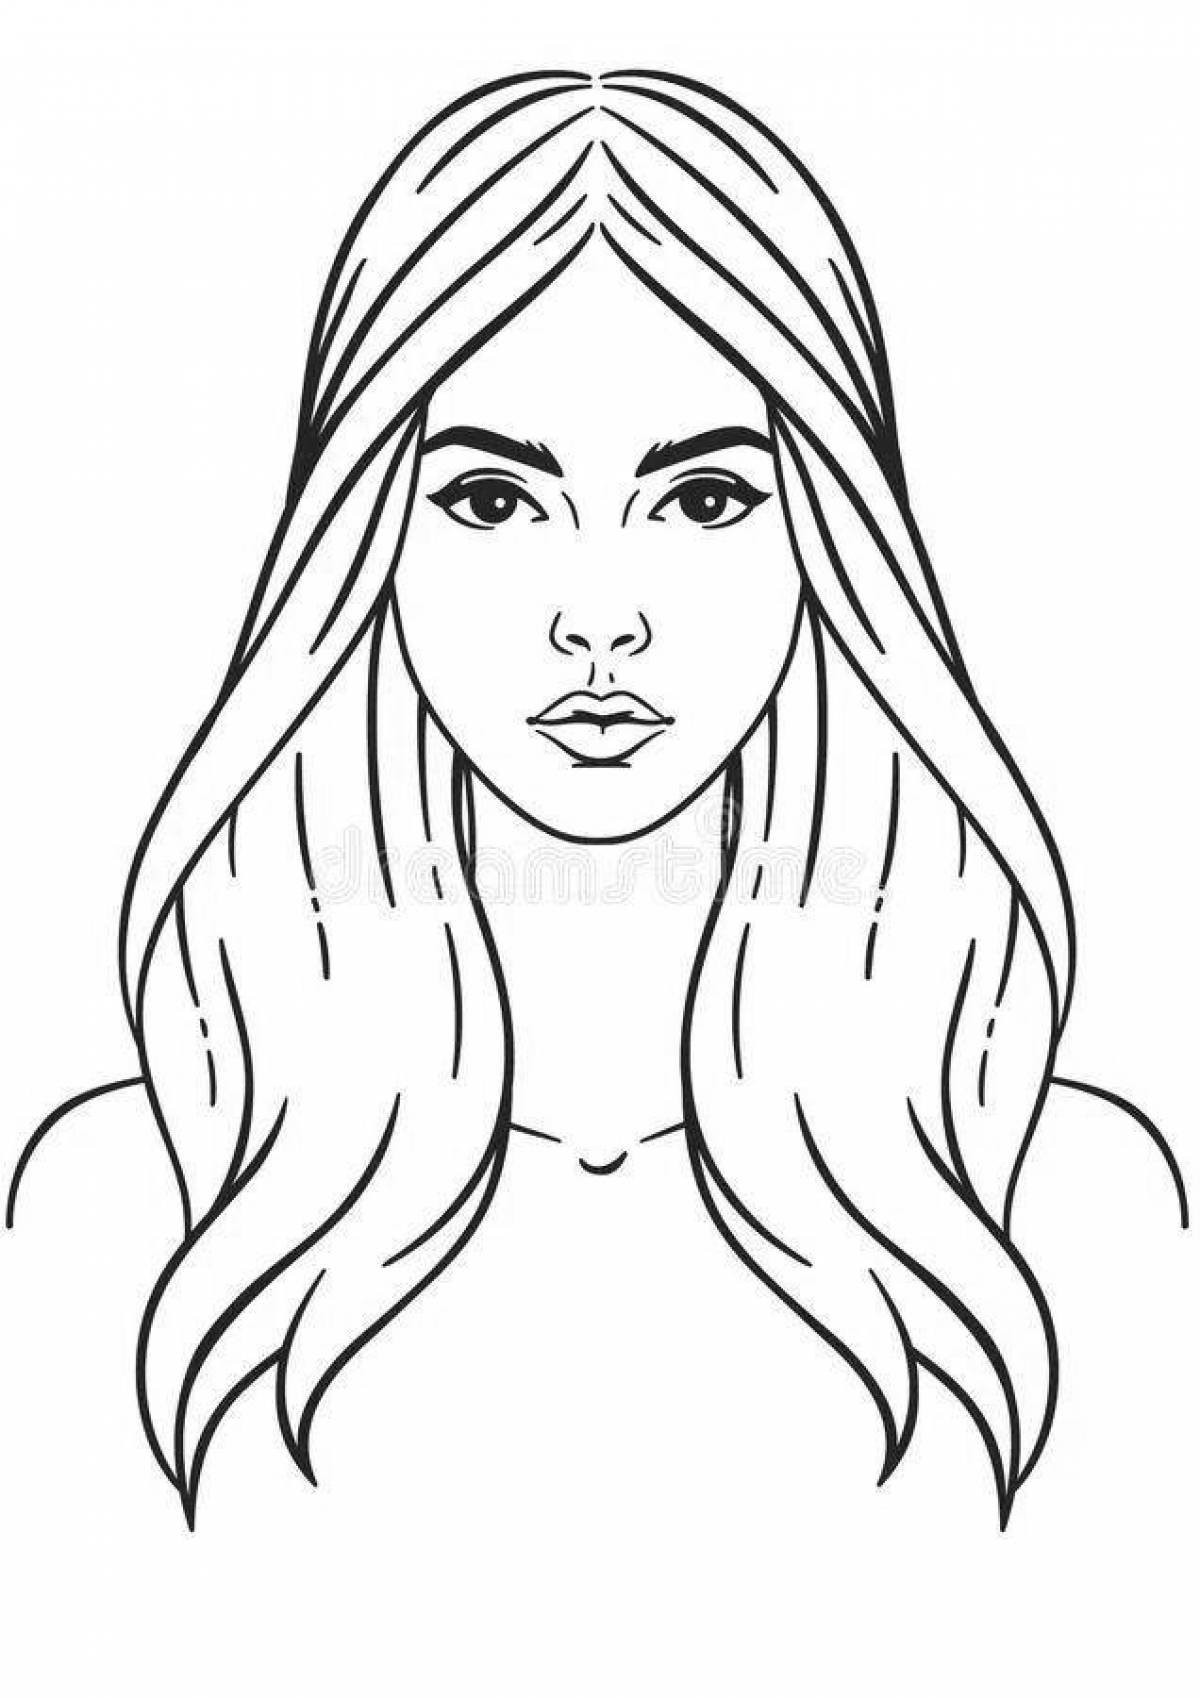 Fairy coloring pages with makeup for girls